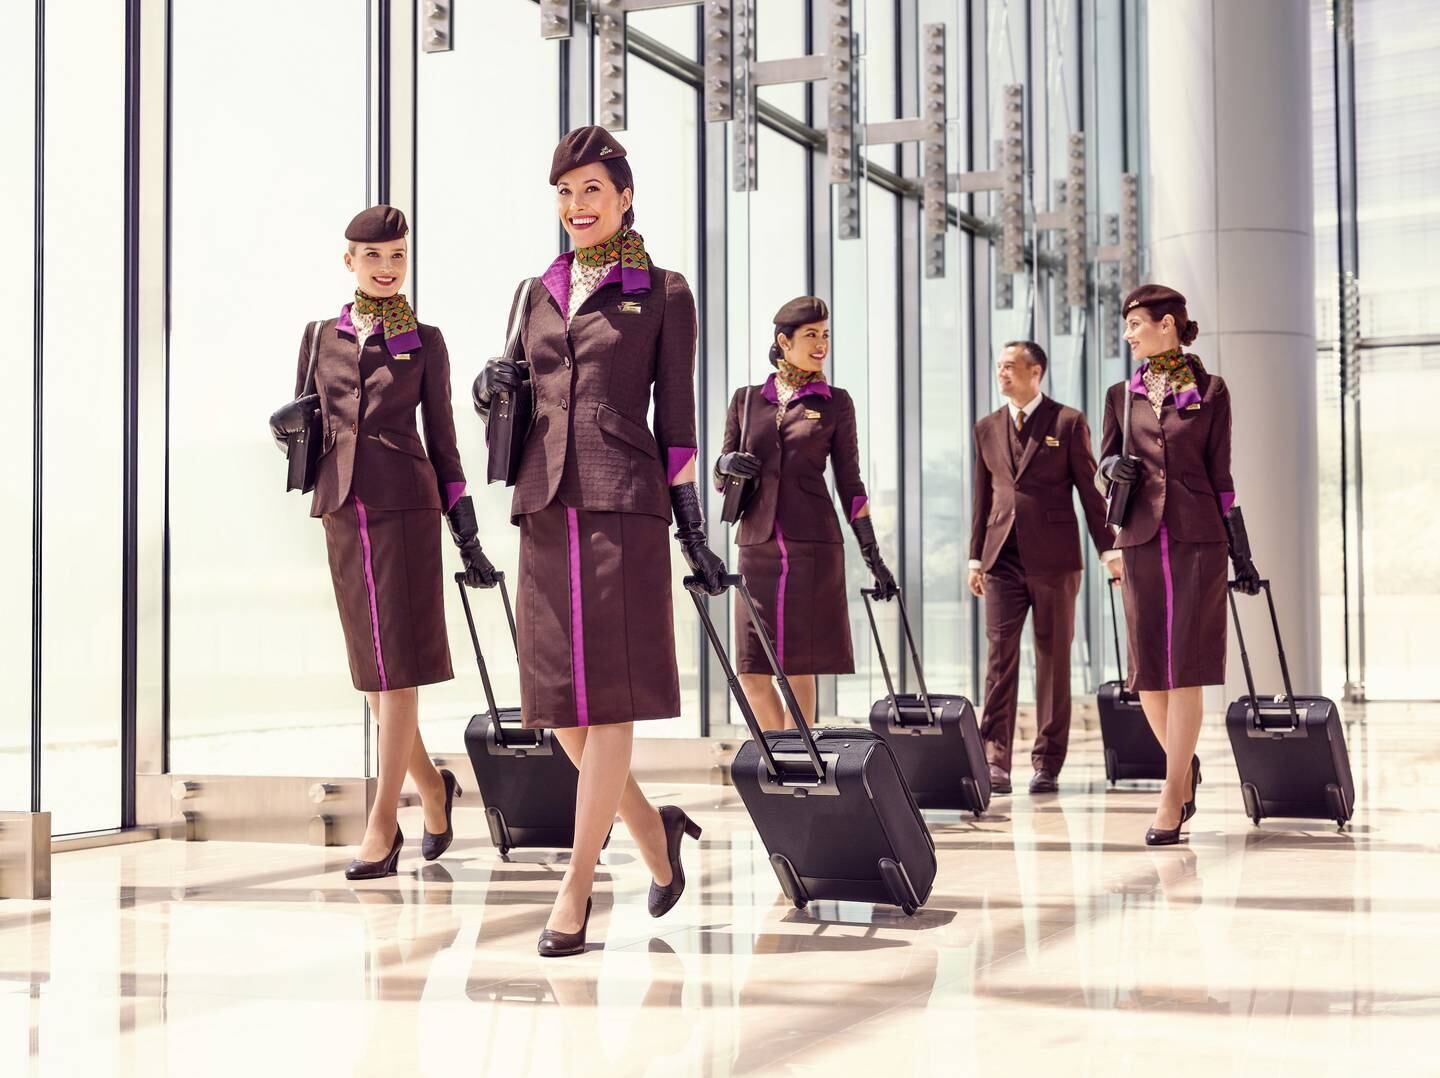 Cabin crew and ground crew at Etihad Airways are undergoing training to be able to identify and support family travel needs. Photo: Etihad